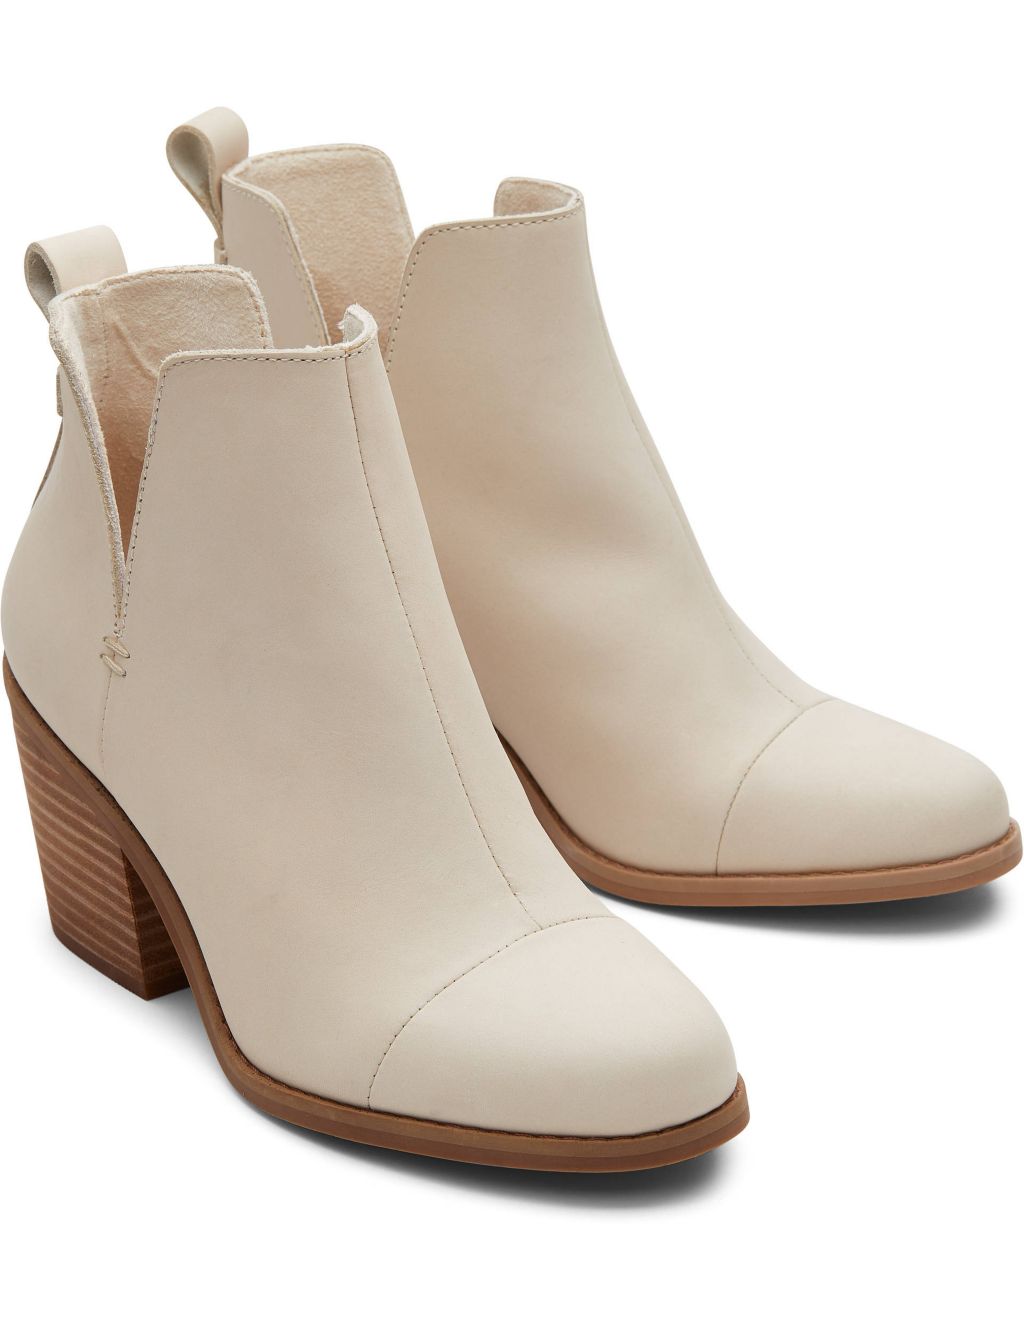 Leather Block Heel Round Toe Ankle Boots image 2